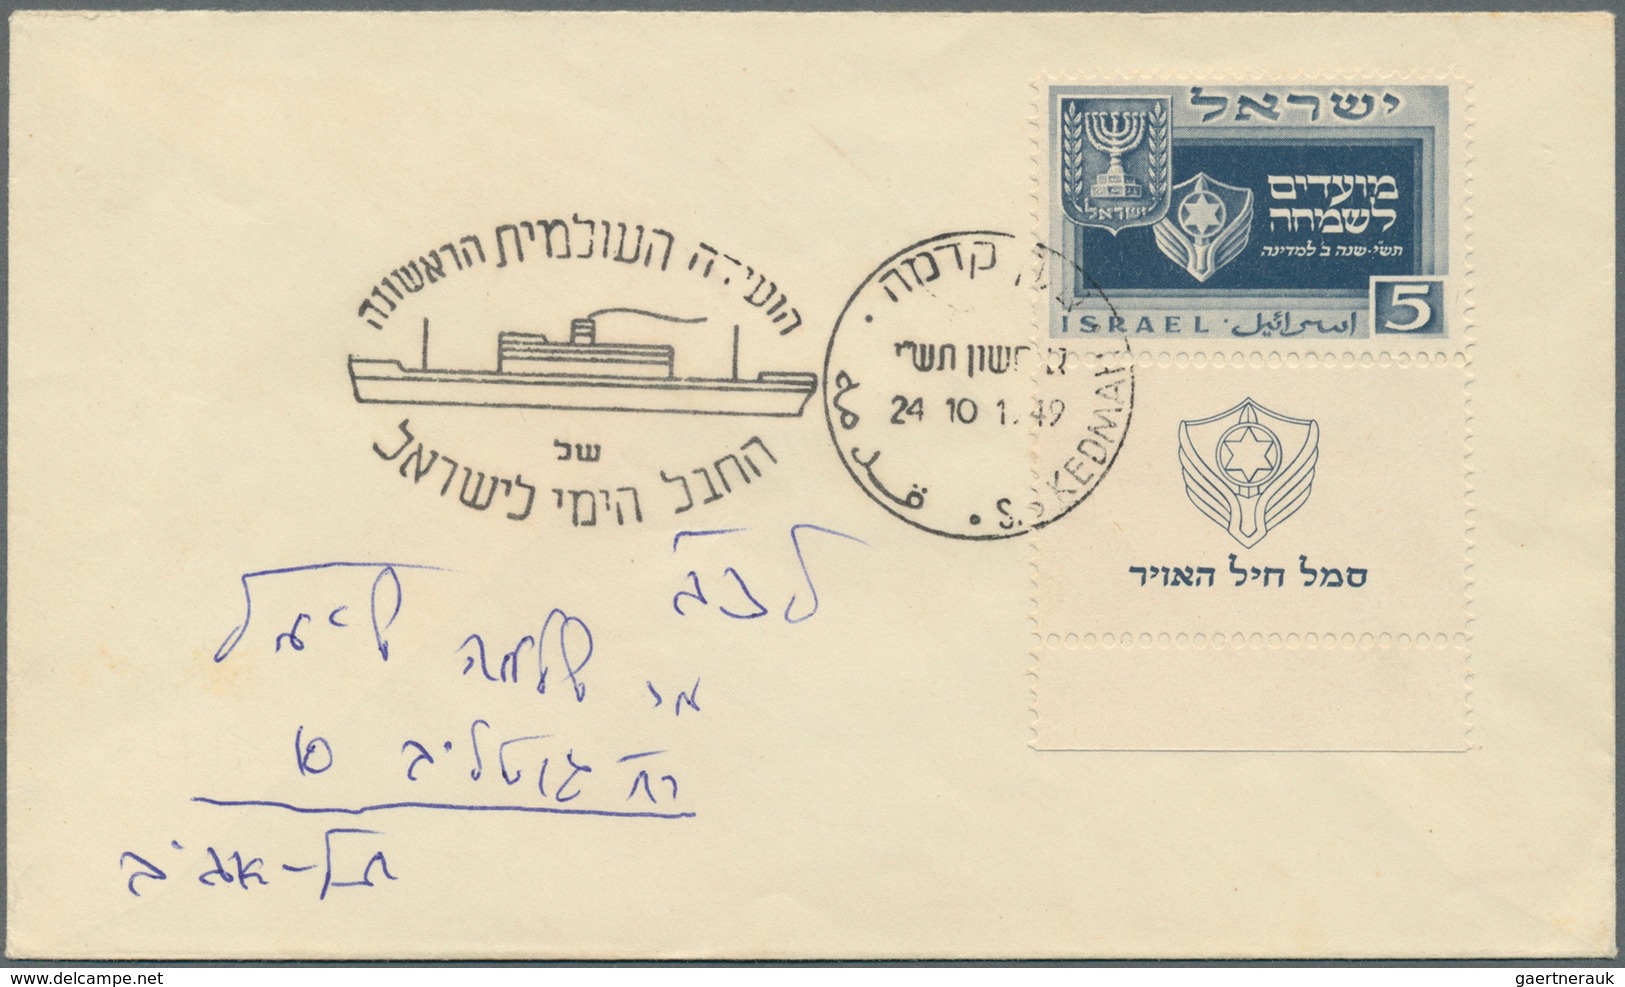 Israel: 1949/1959, holding of apprx 210 covers/cards/used stationeries, comprising commercial and ph